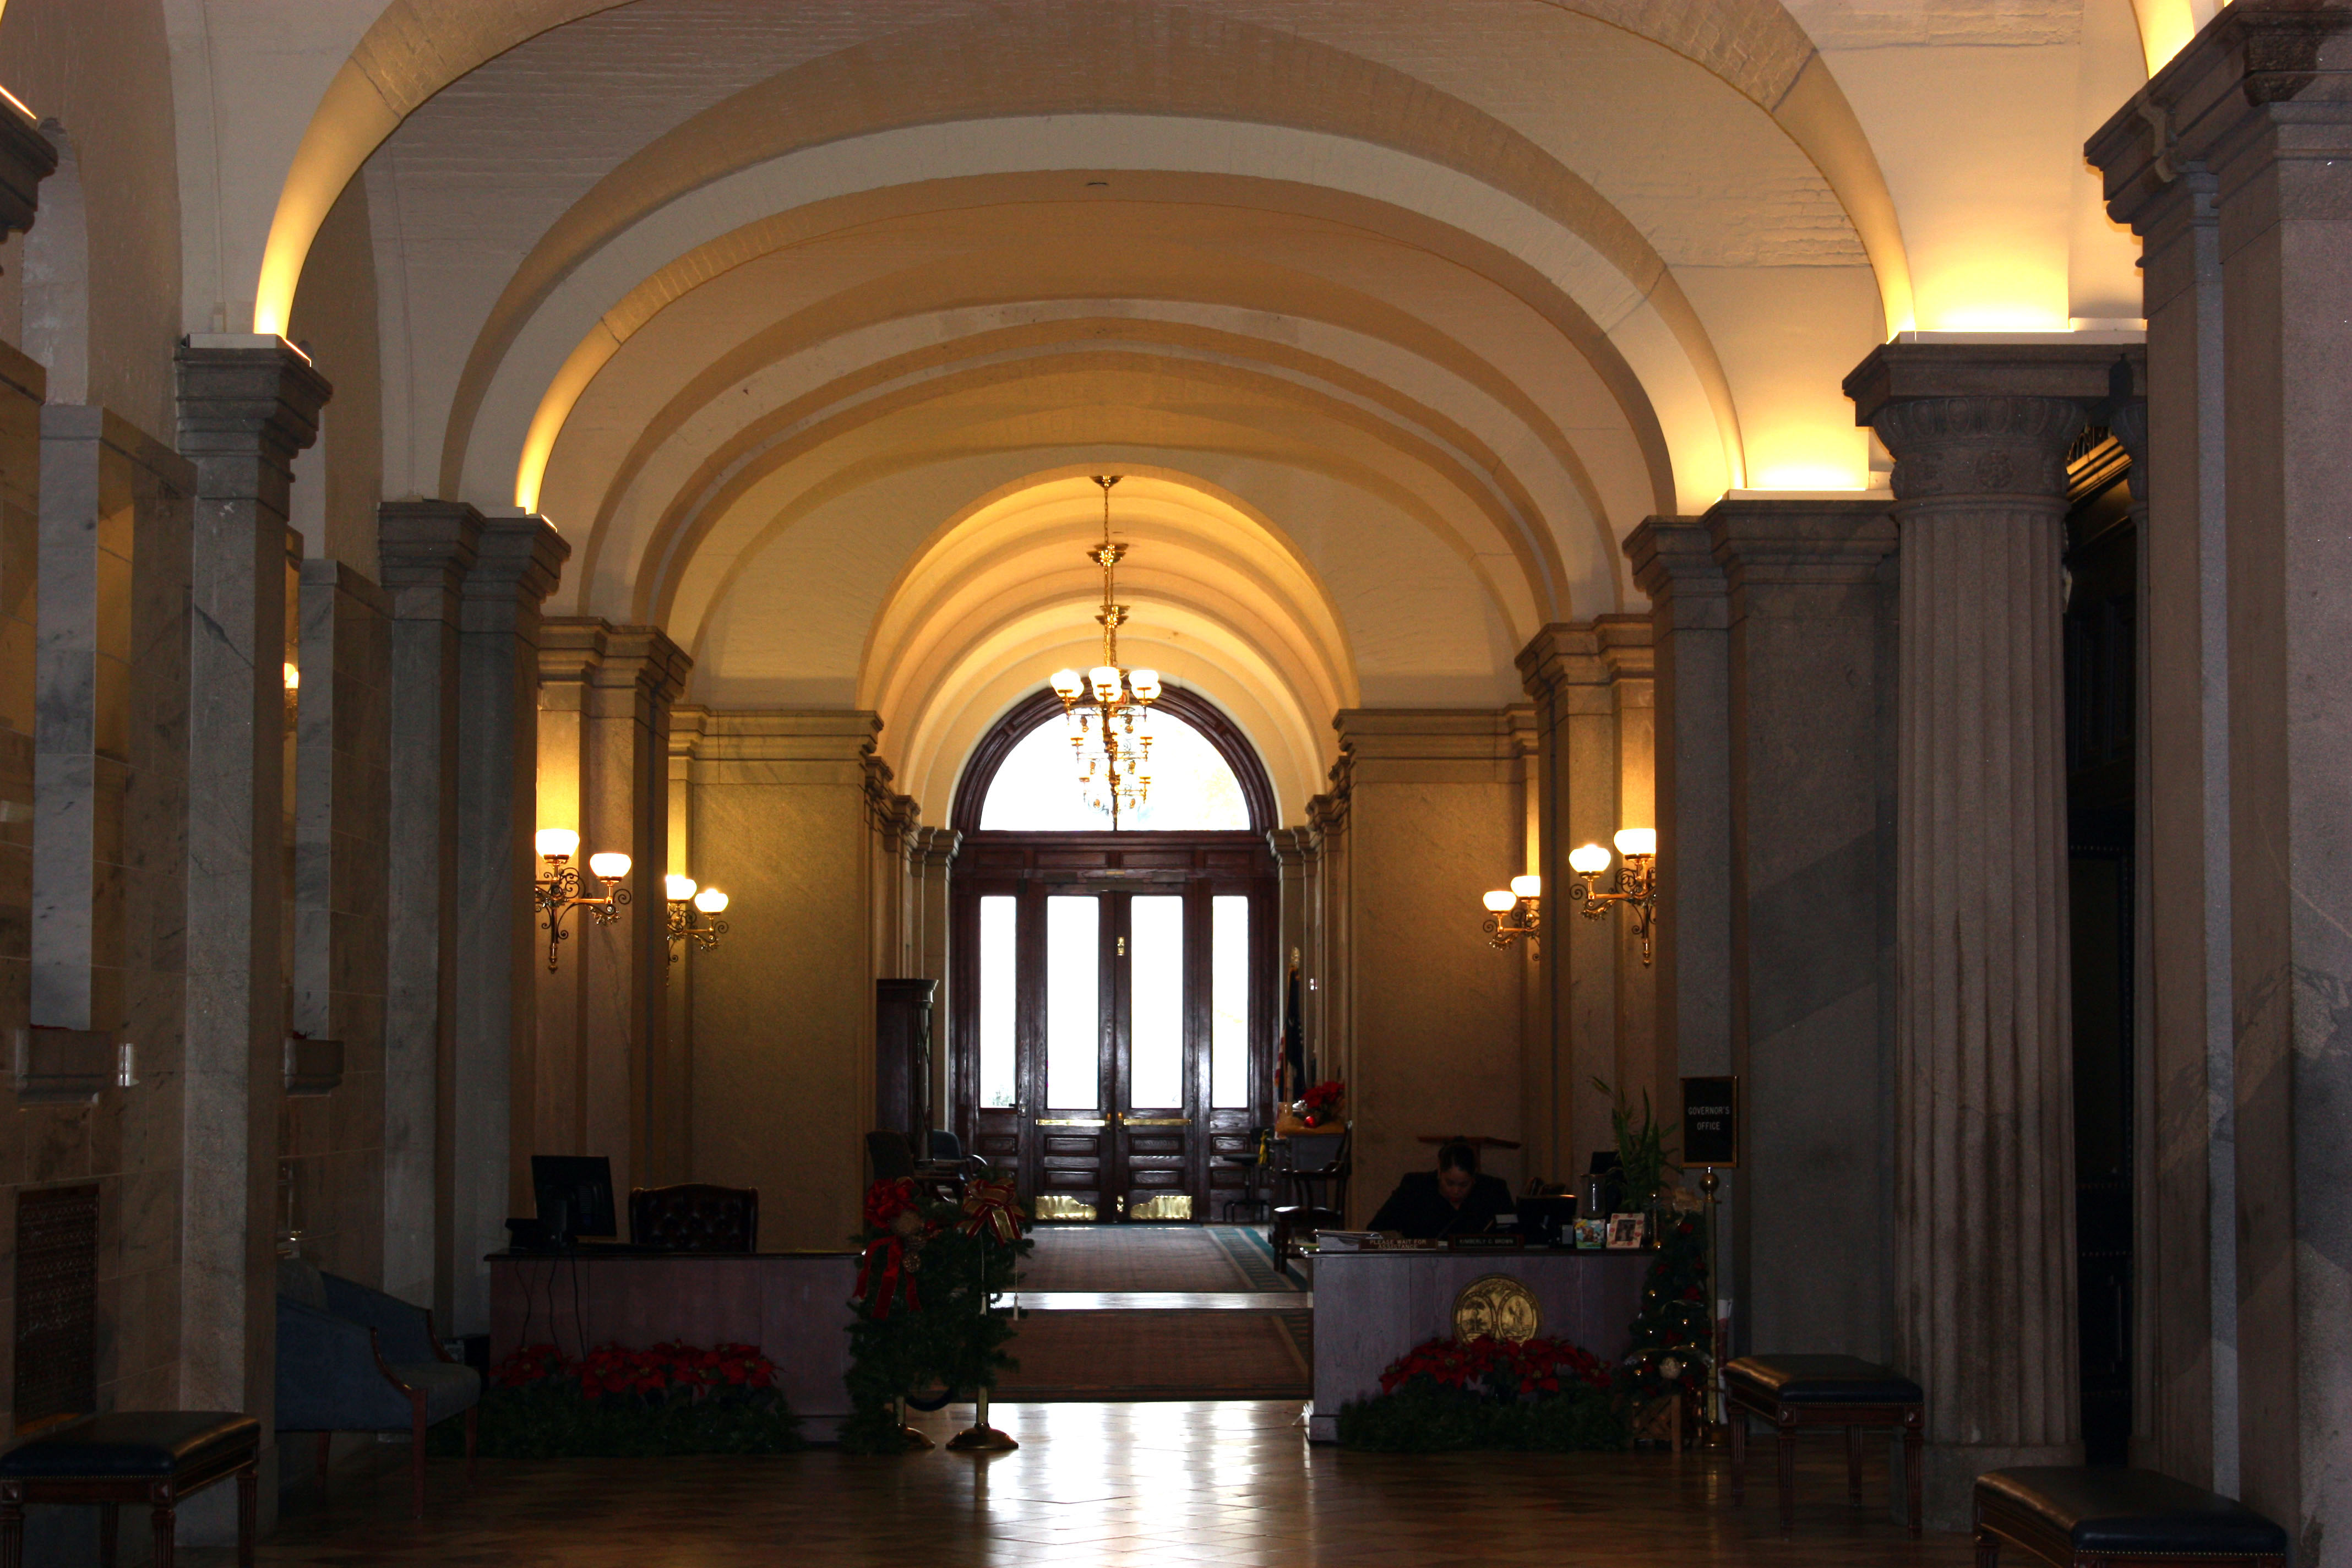 First Floor, West Wing of the State House